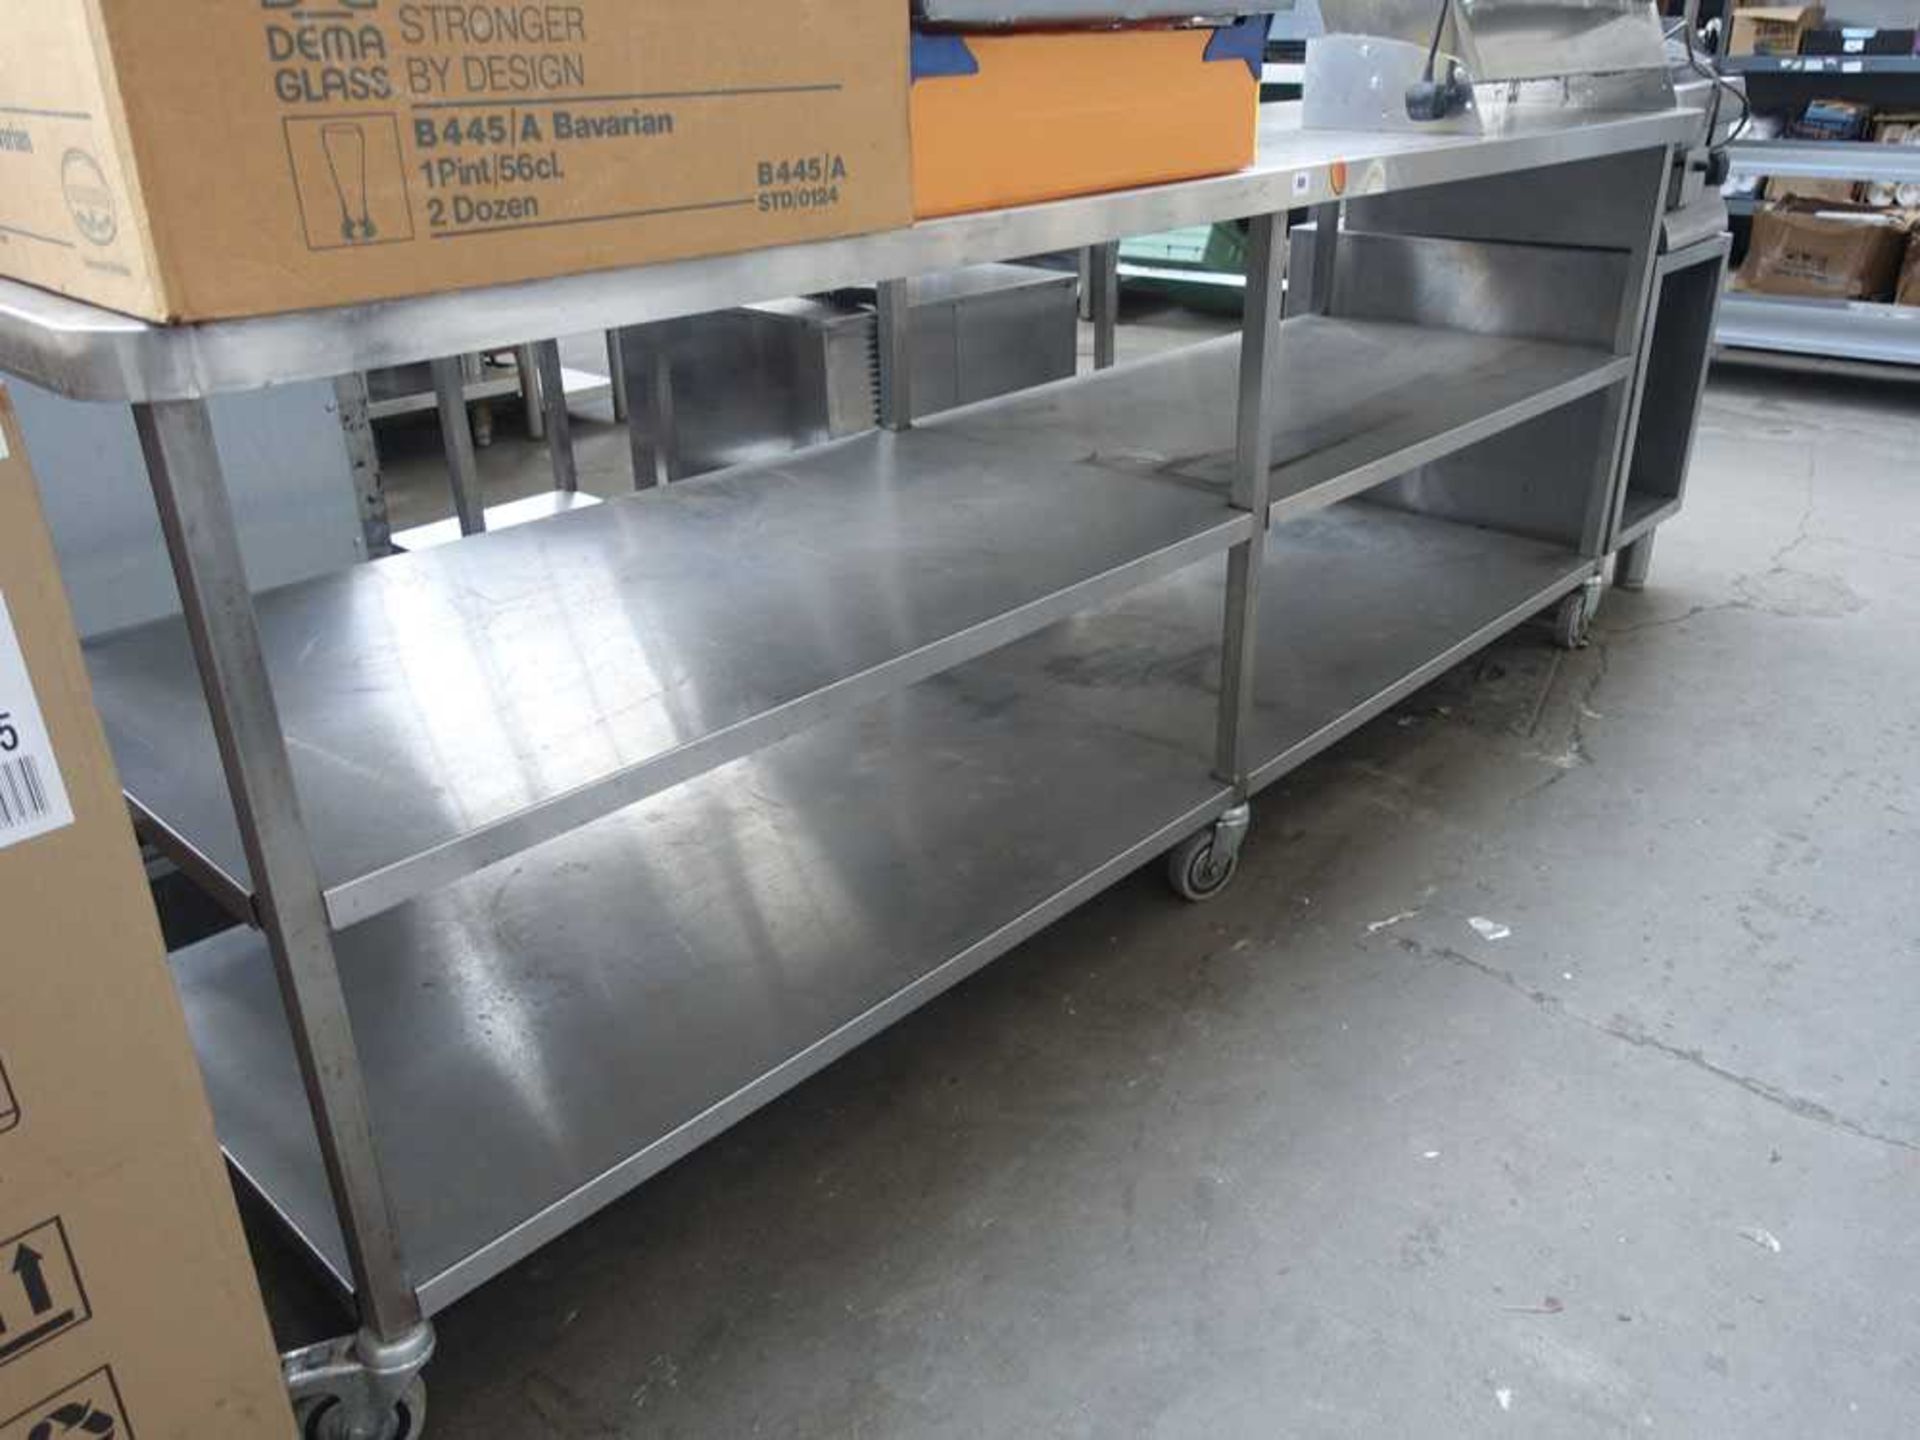 240cm stainless steel preparation table on castors with shelves under